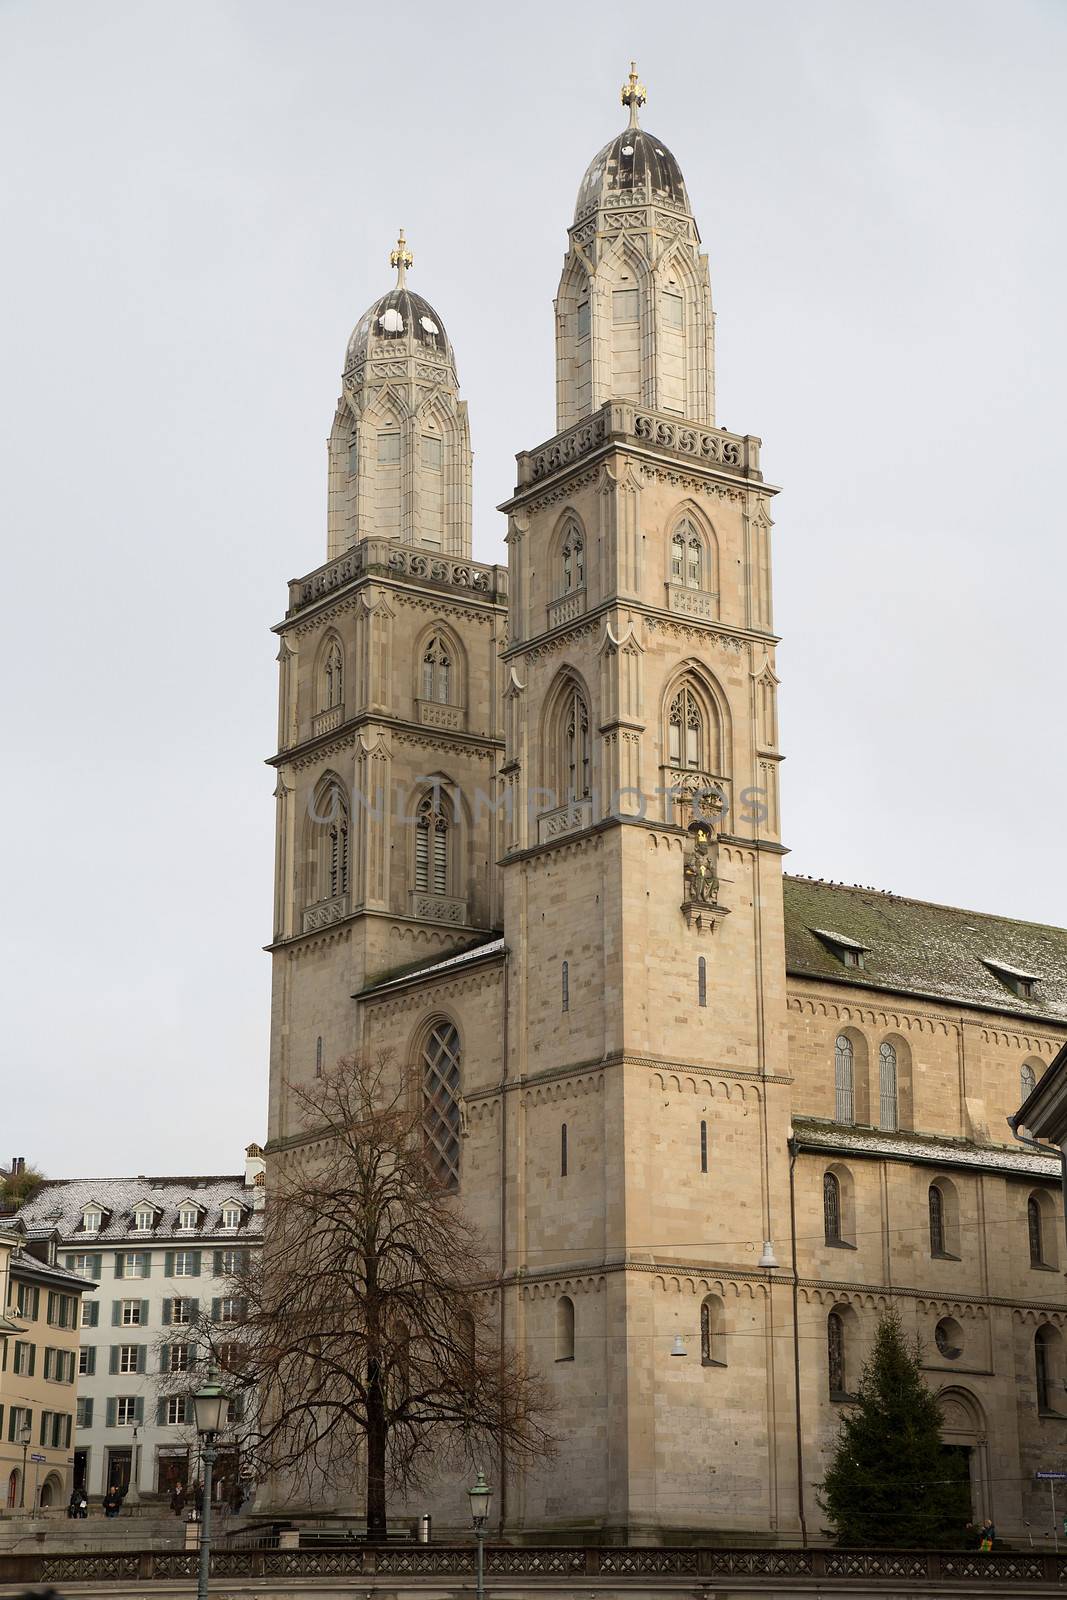 The twin towers of the Grussmunster church of Zurich in Switzerland